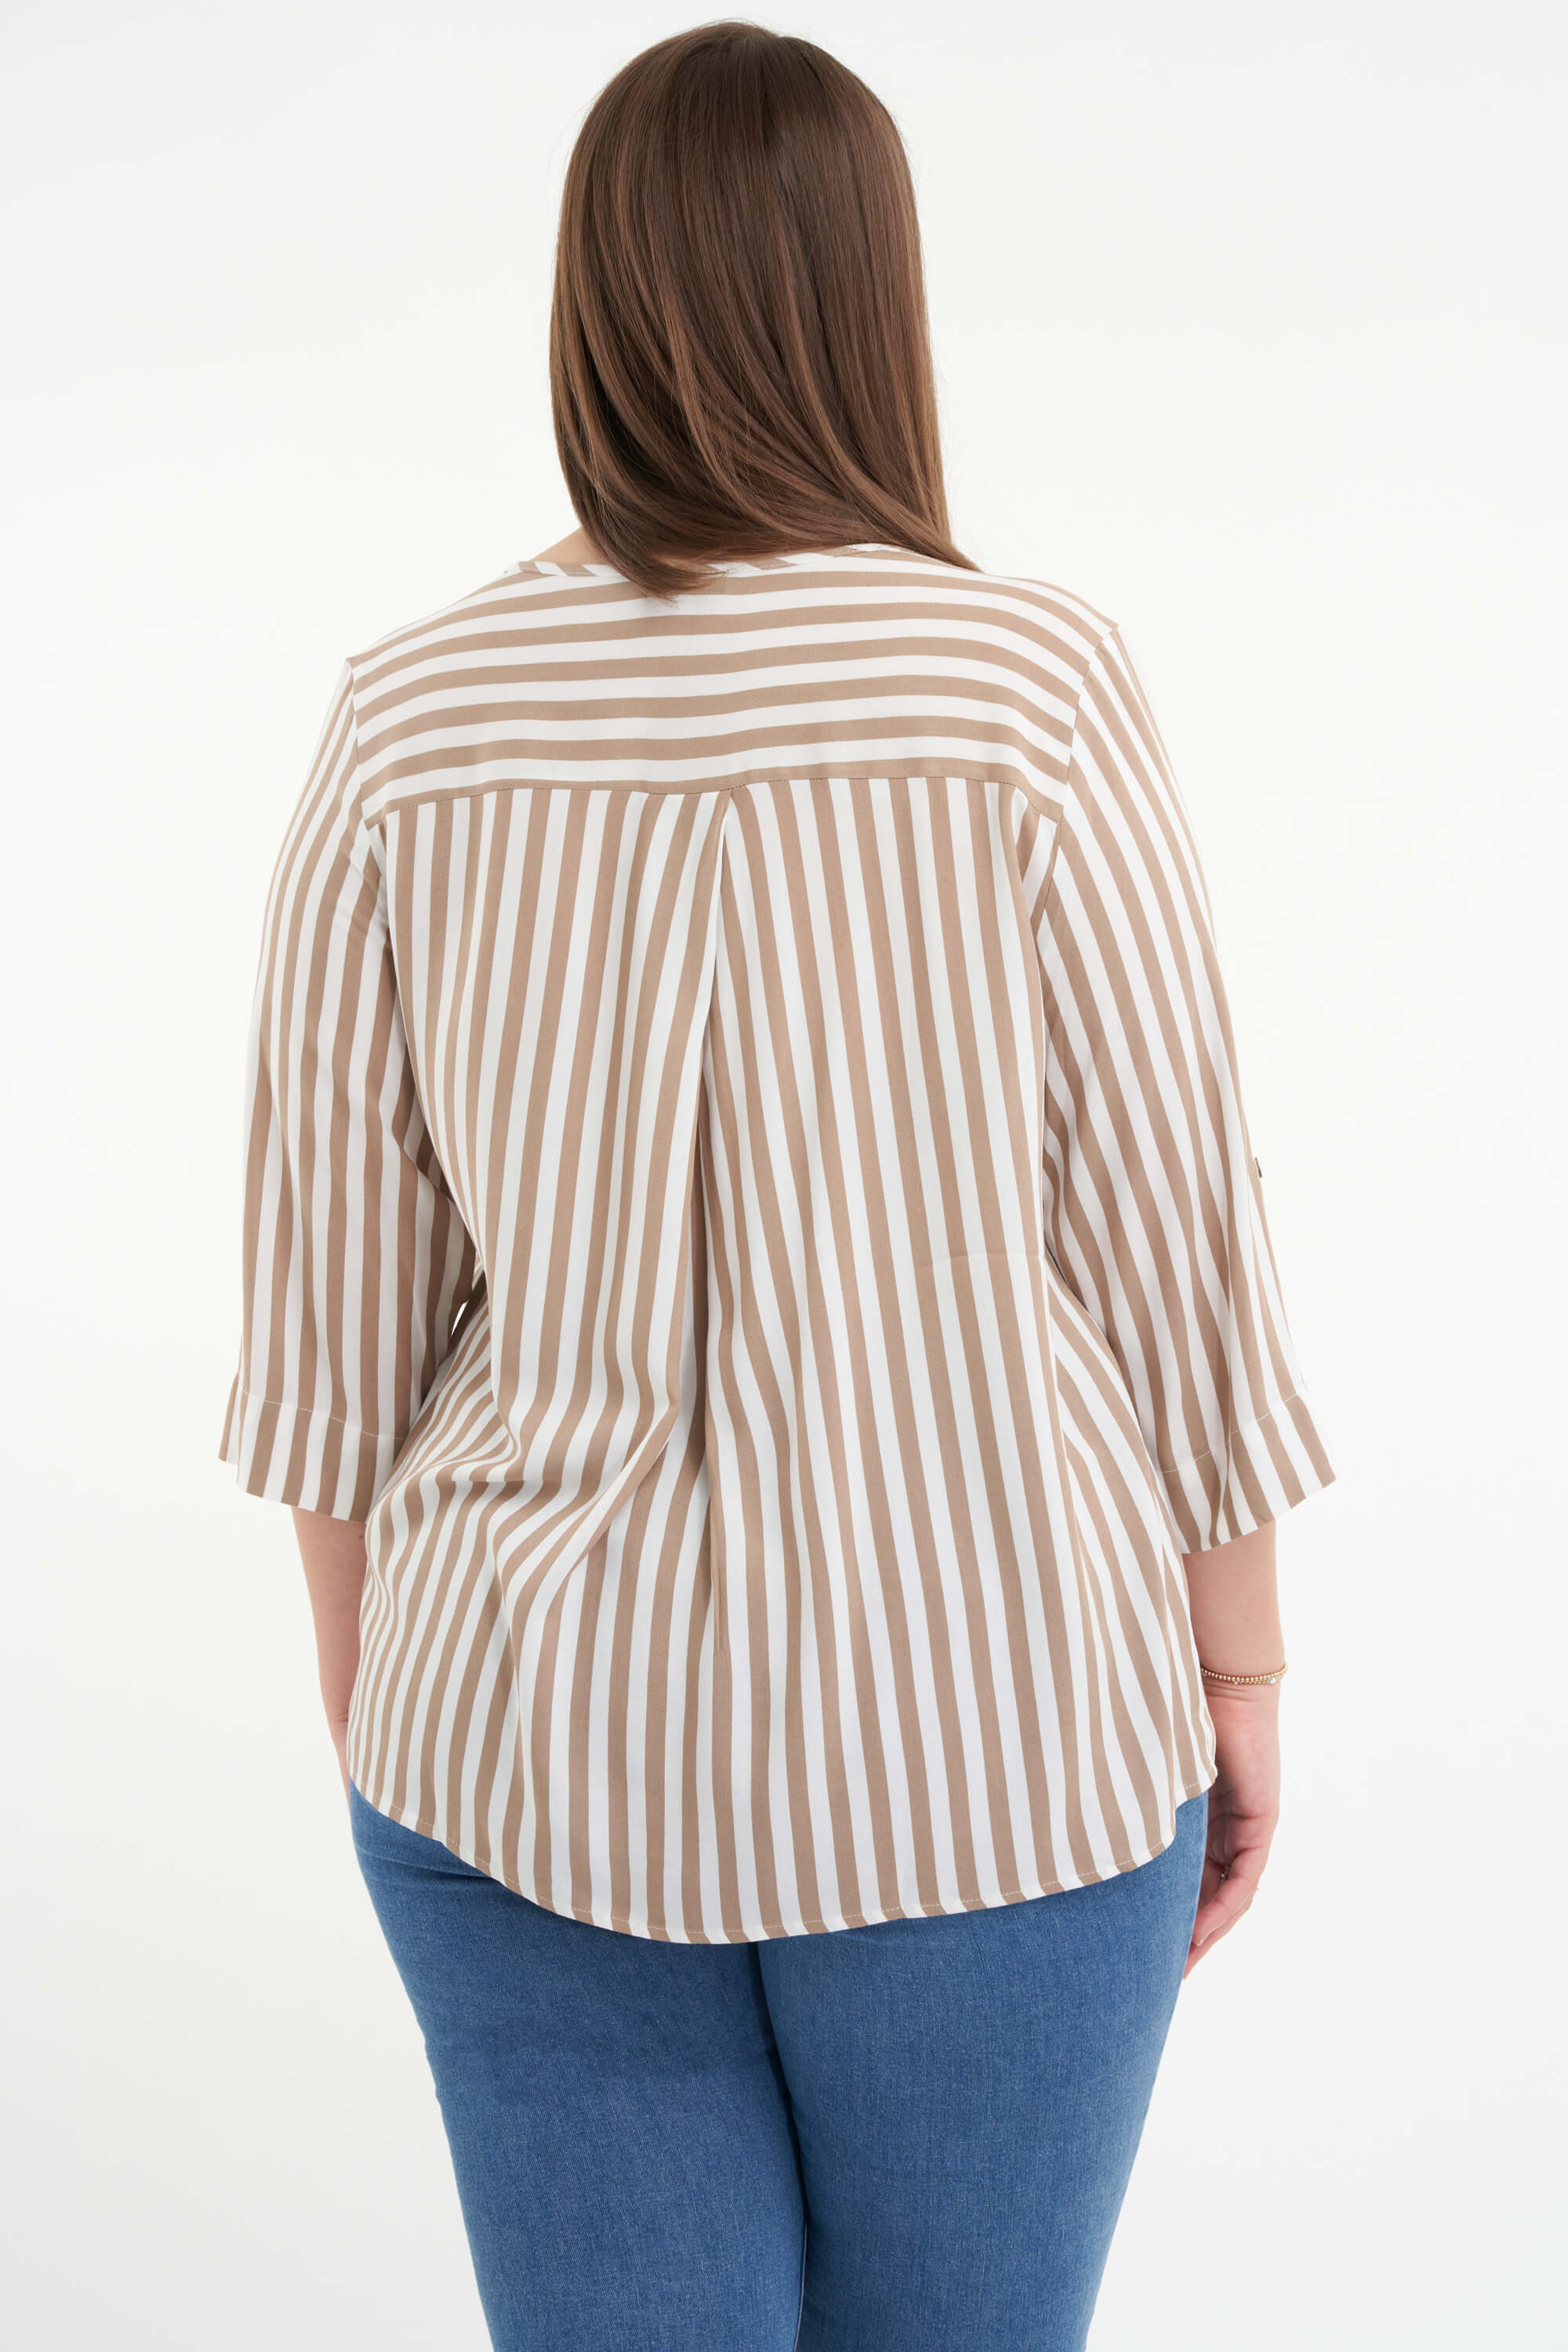 Blusa de rayas image number null